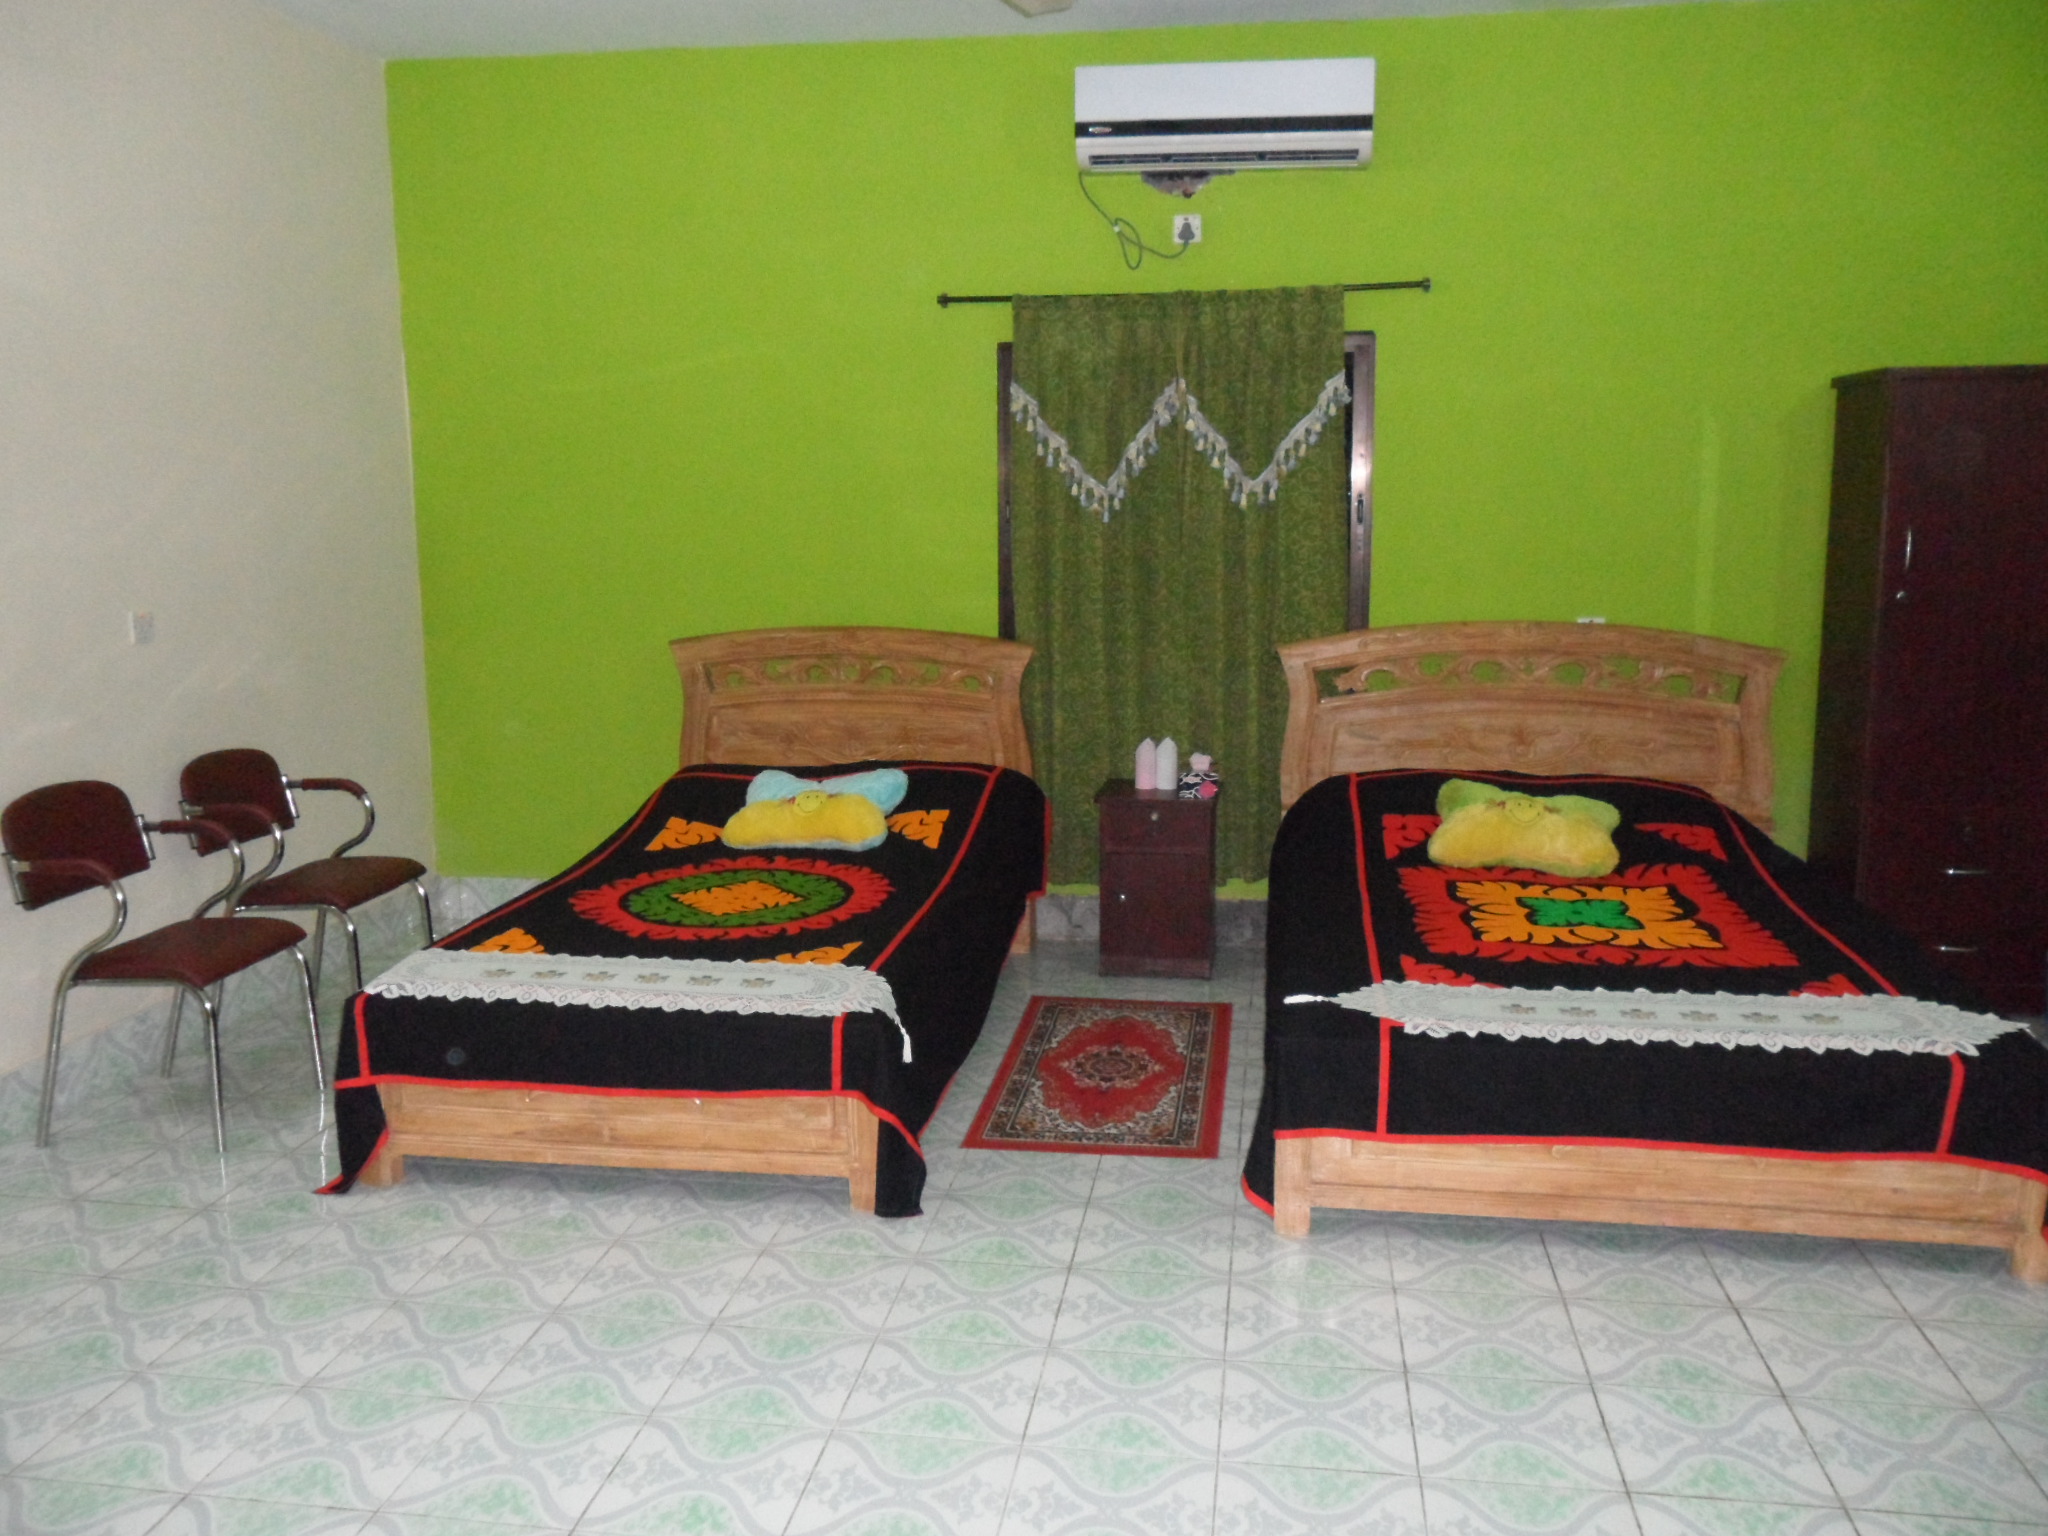 Rent-A-Resort Cottage to stay daylong with intimate one. large image 0